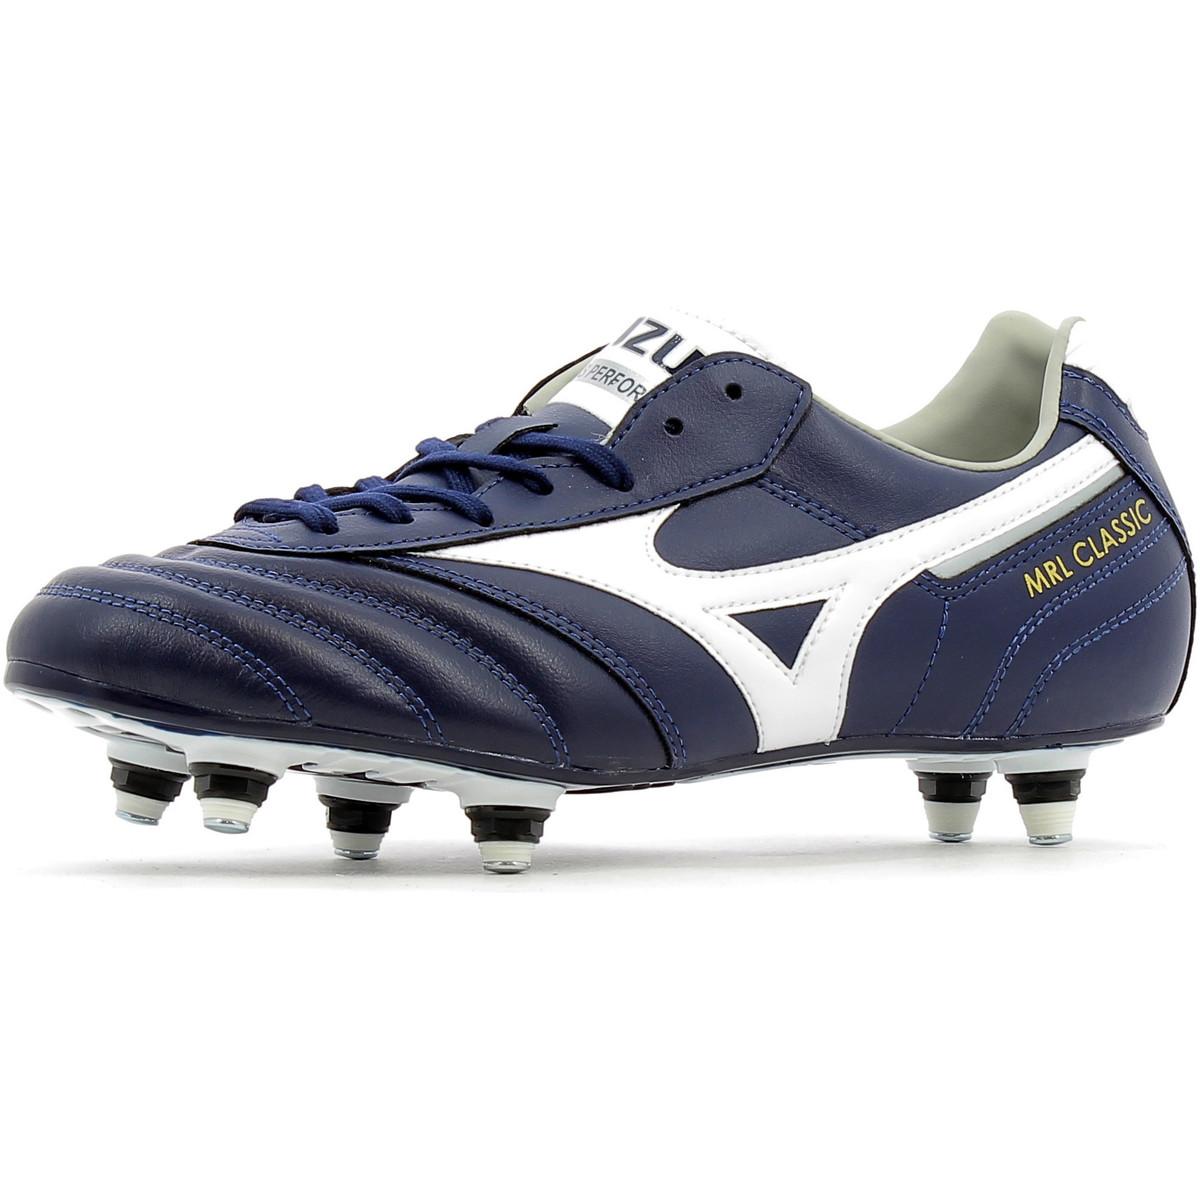 mizuno voetbalschoenen sale Cheaper Than Retail Price> Buy Clothing,  Accessories and lifestyle products for women & men -